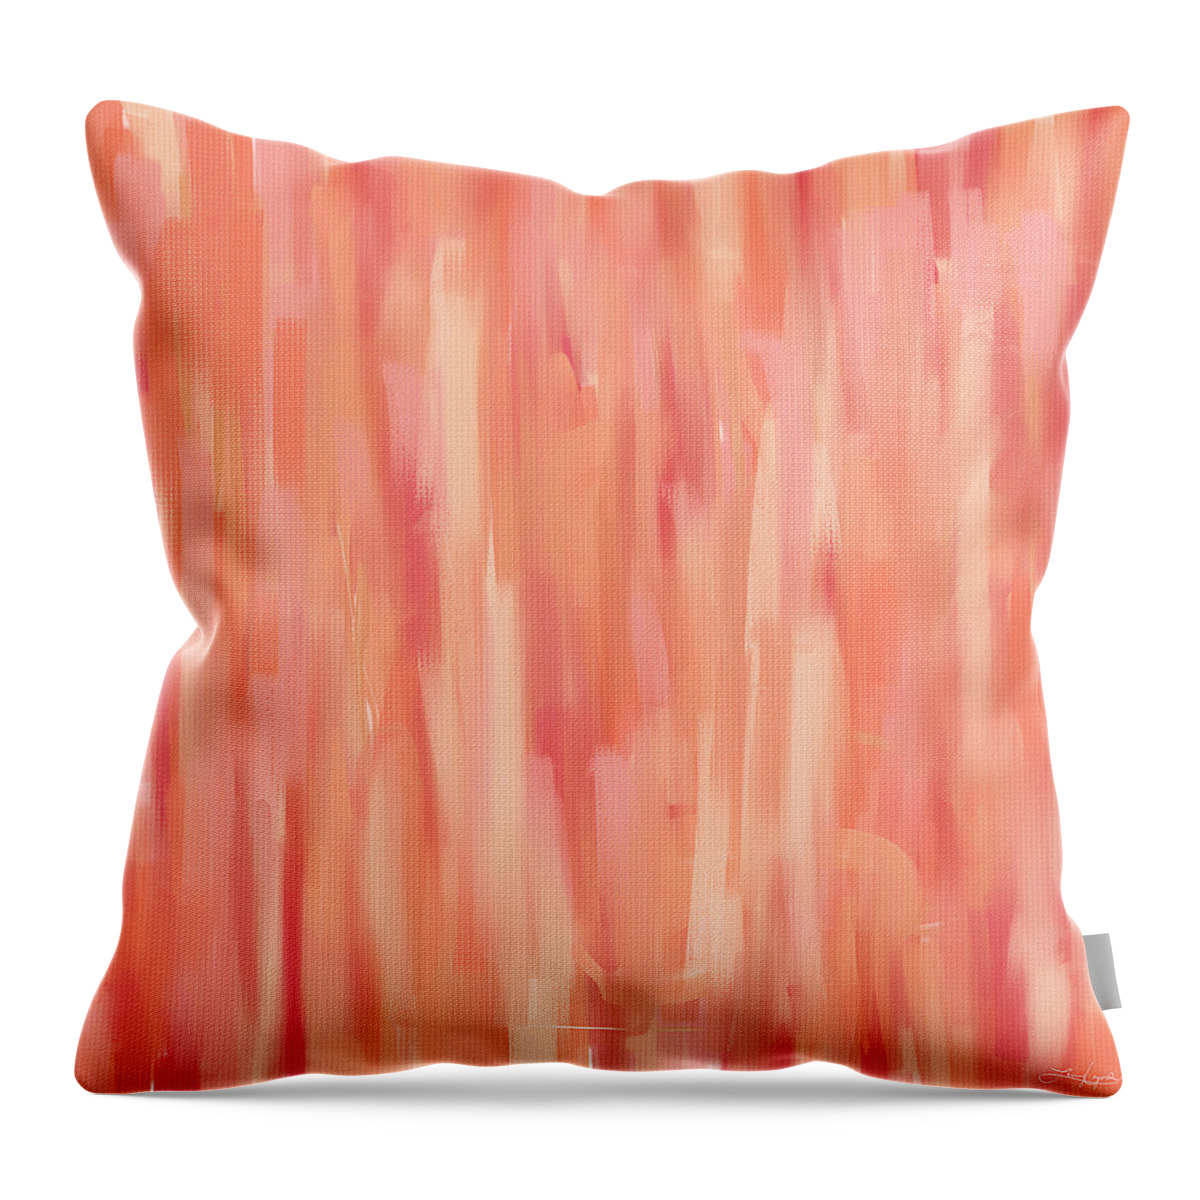 Peach Throw Pillow featuring the painting Passionate Peach by Lourry Legarde